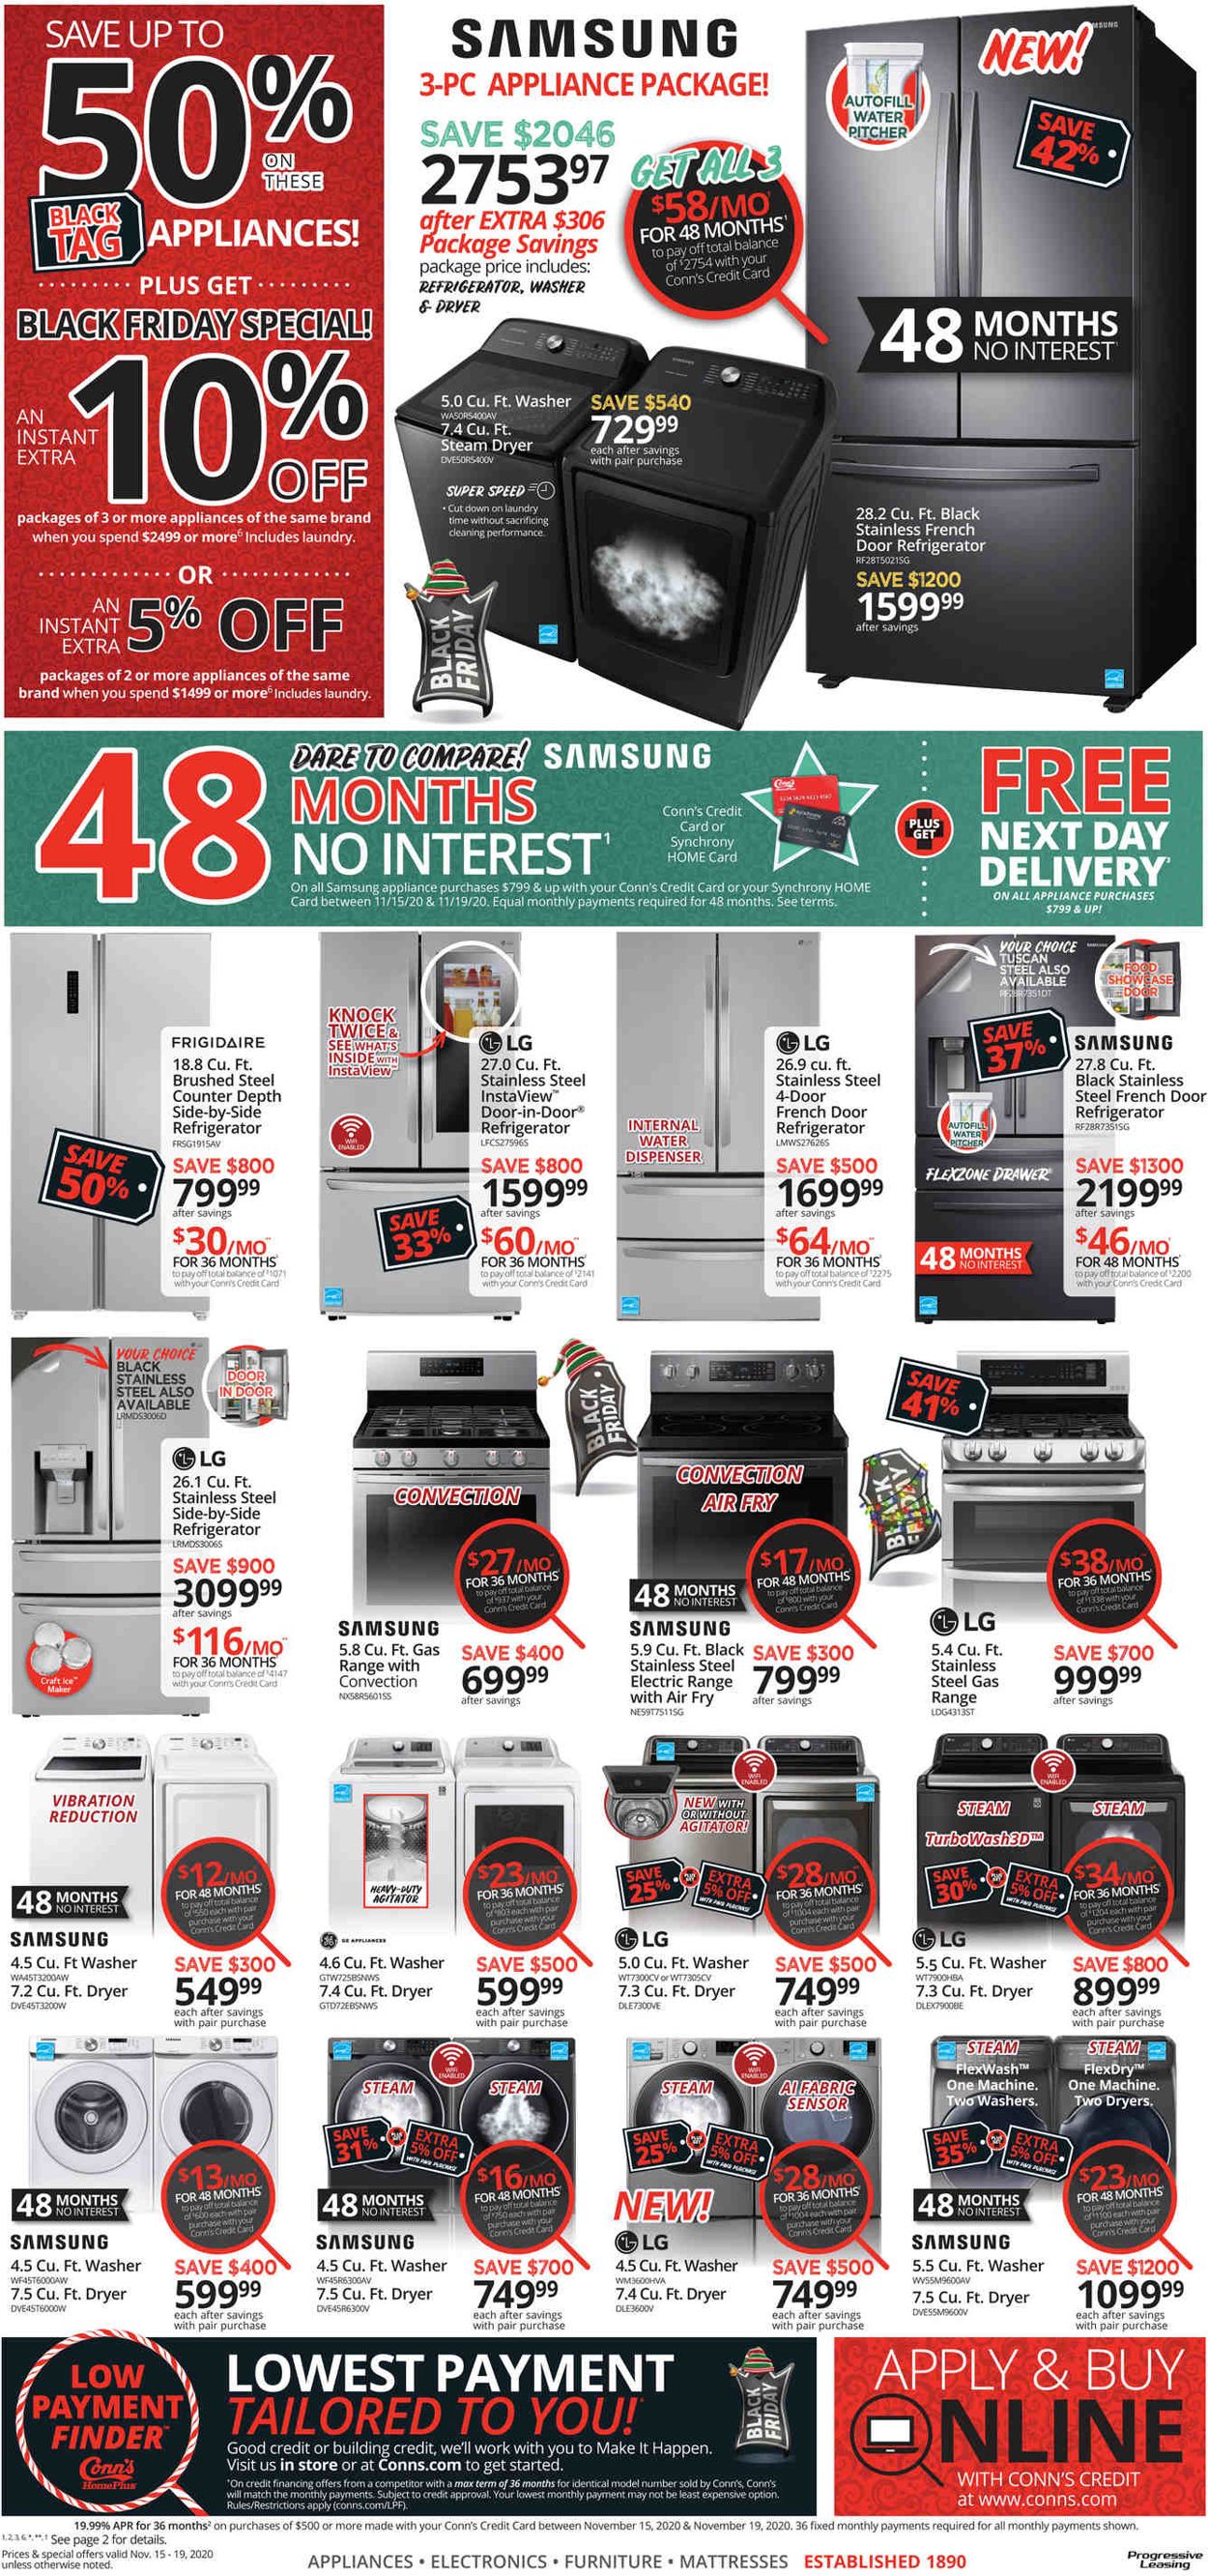 Conn's Home Plus Black Friday 2020 Current weekly ad 11/15 11/19/2020